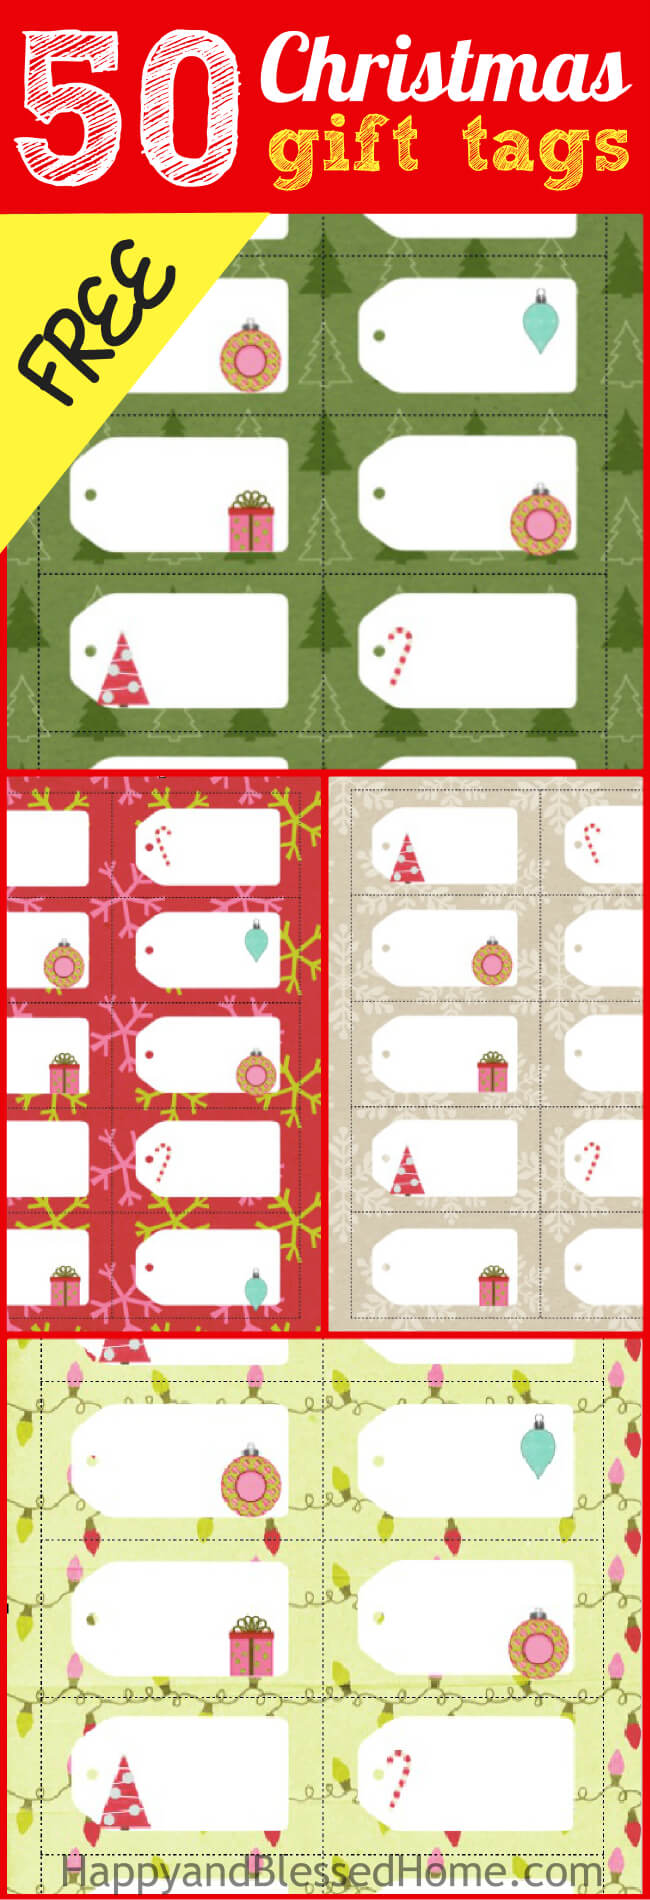 50 Christmas Gift Tags FREE from HappyandBlessedHome.com